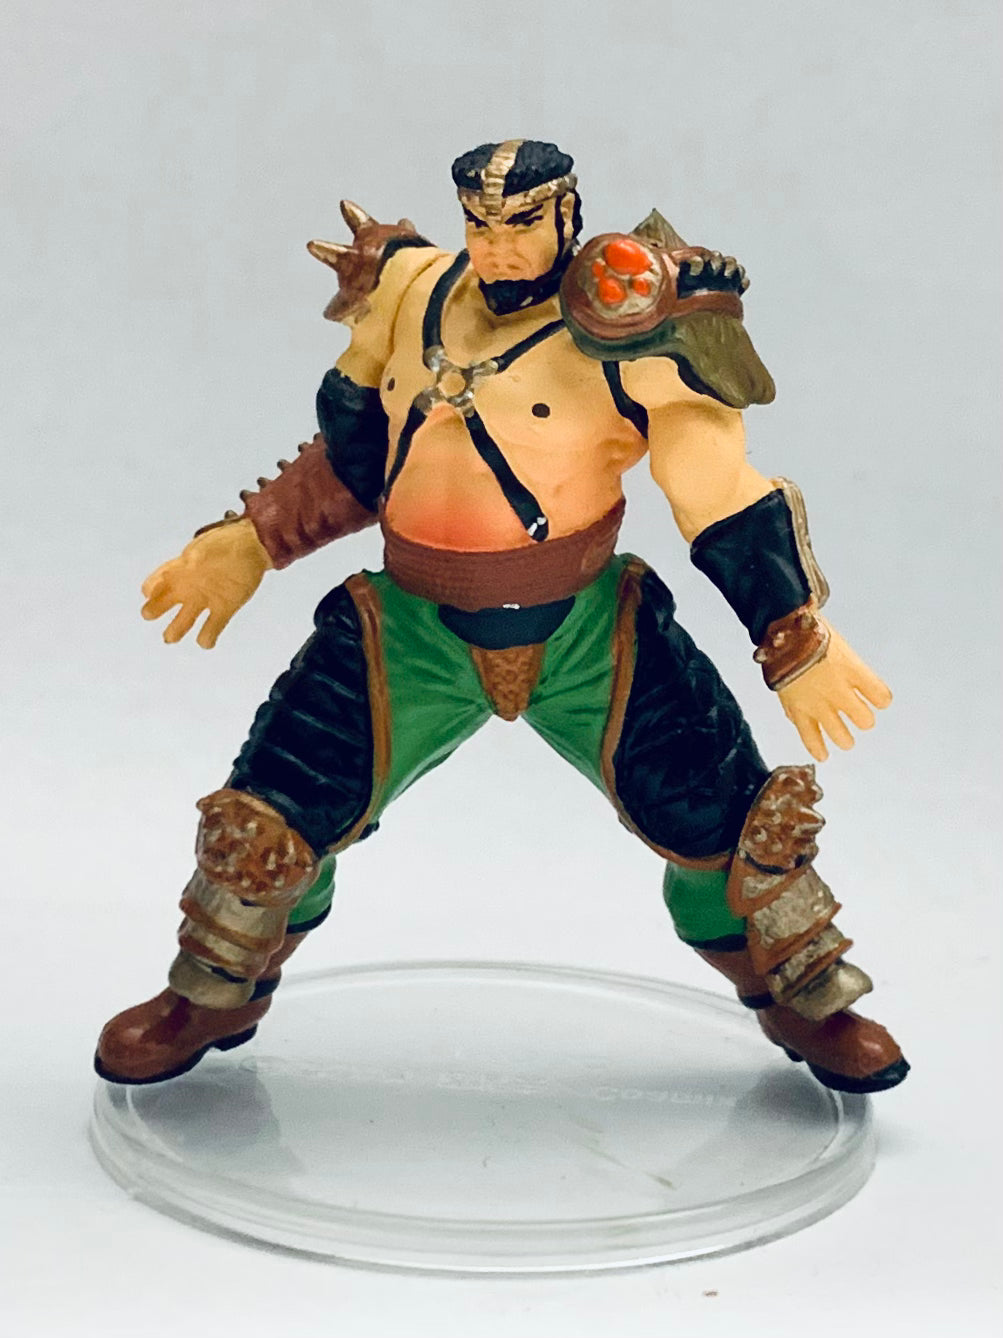 Hokuto no Ken - Fudou - Fist of the North Star All-Star Retsuden Capsule Figure Collection Part 4 - Advent! End of the Century Conqueror